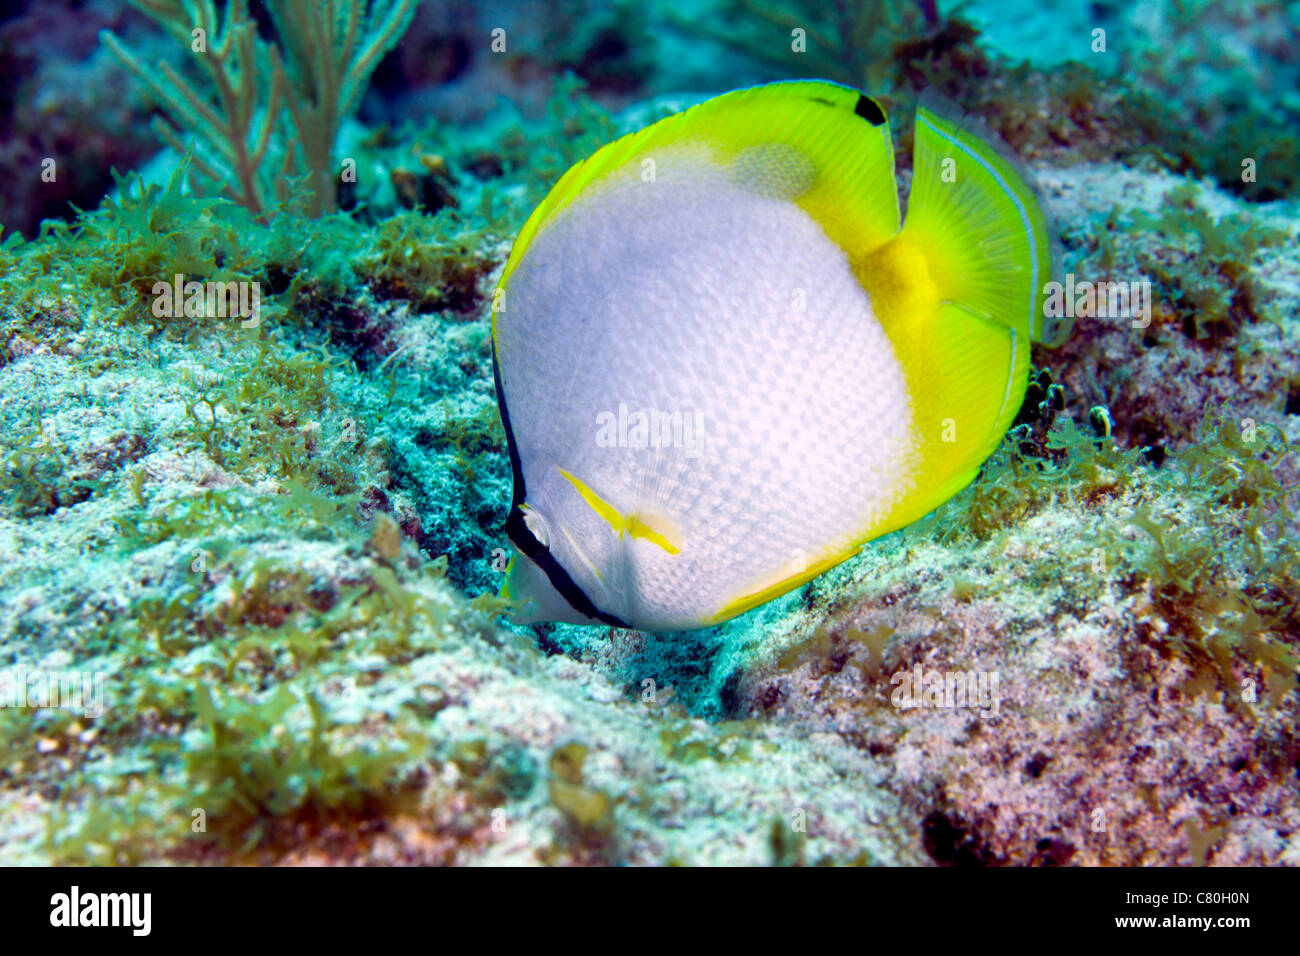 A Spotfin Butterflyfish feeding off the coral reef, Key Largo, Florida. Stock Photo